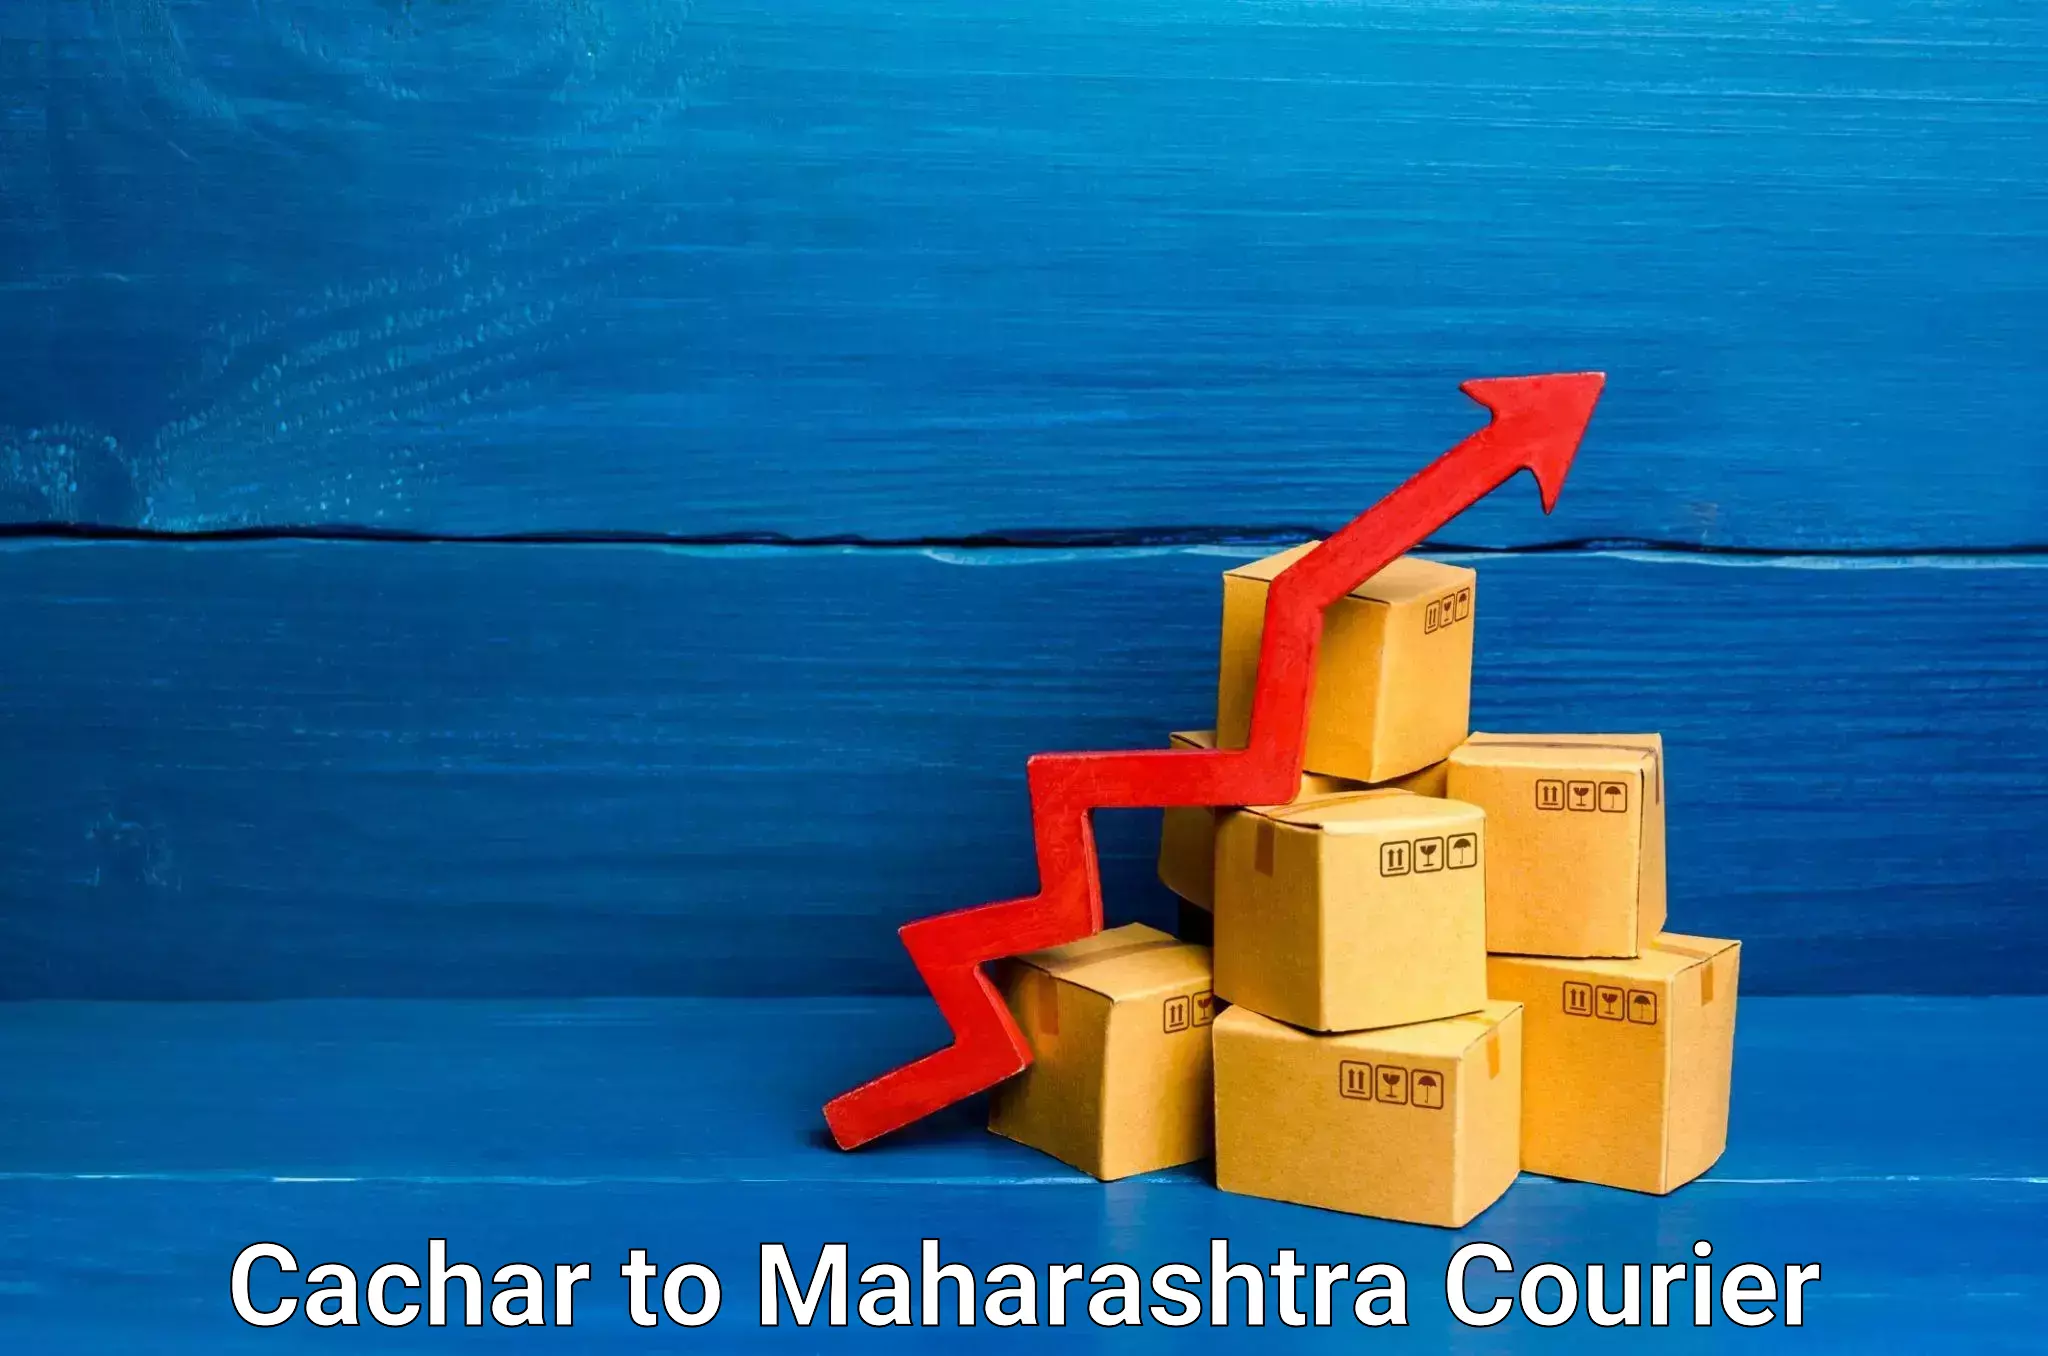 State-of-the-art courier technology Cachar to Sindhudurg